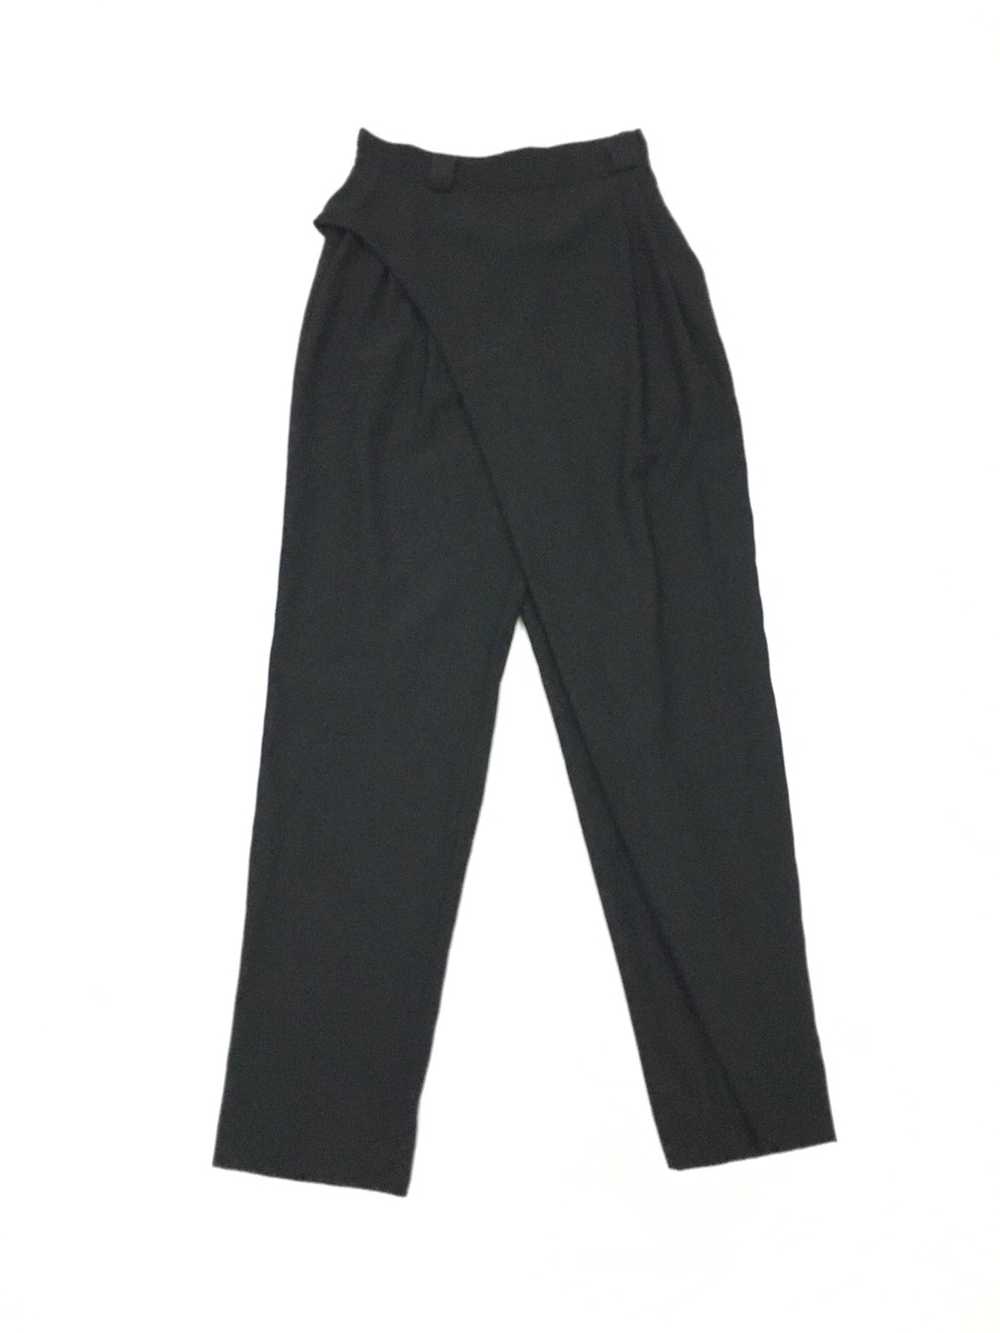 Versace Archive Assymetrical Wool Pants - image 1